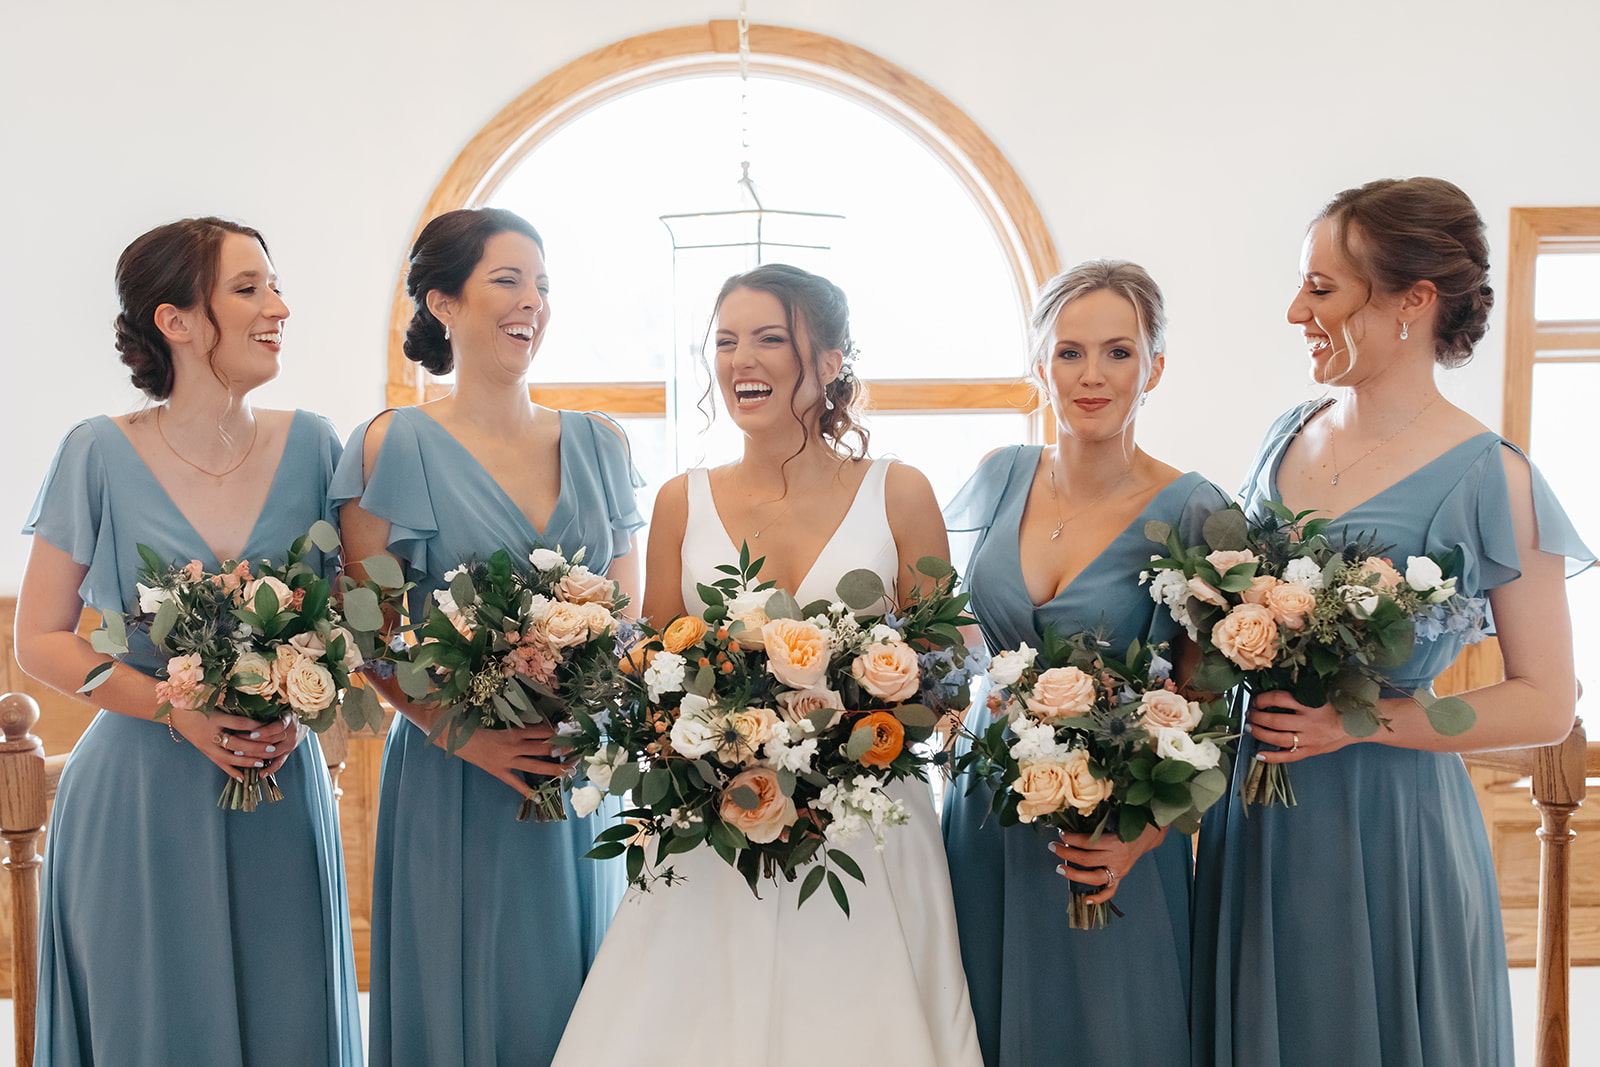 the bride with her bridesmaids laughing